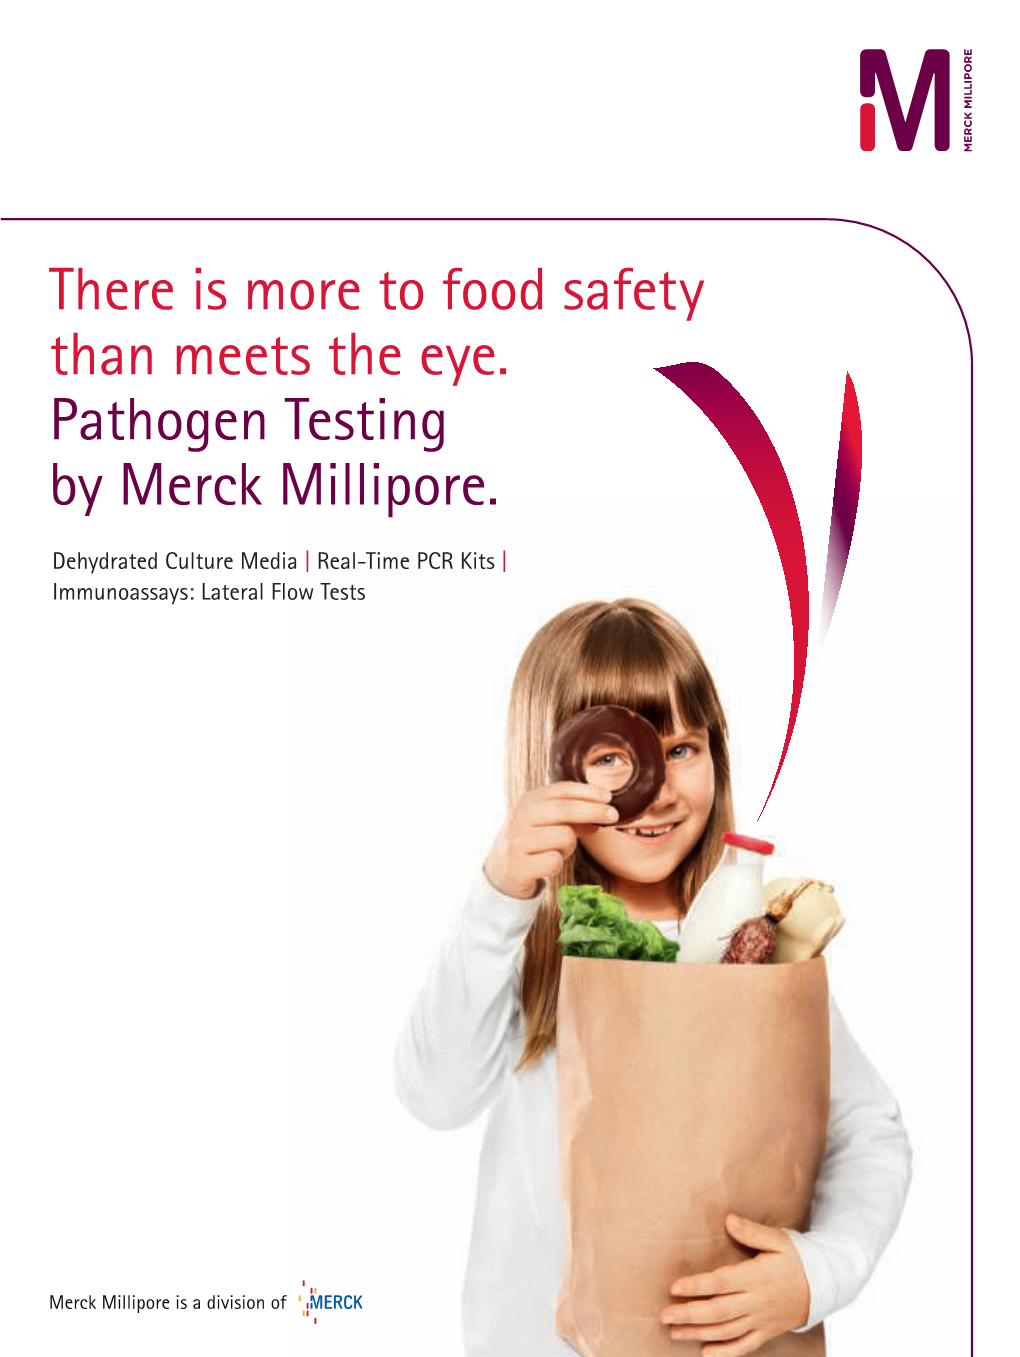 There Is More to Food Safety Than Meets the Eye. Pathogen Testing by Merck Millipore